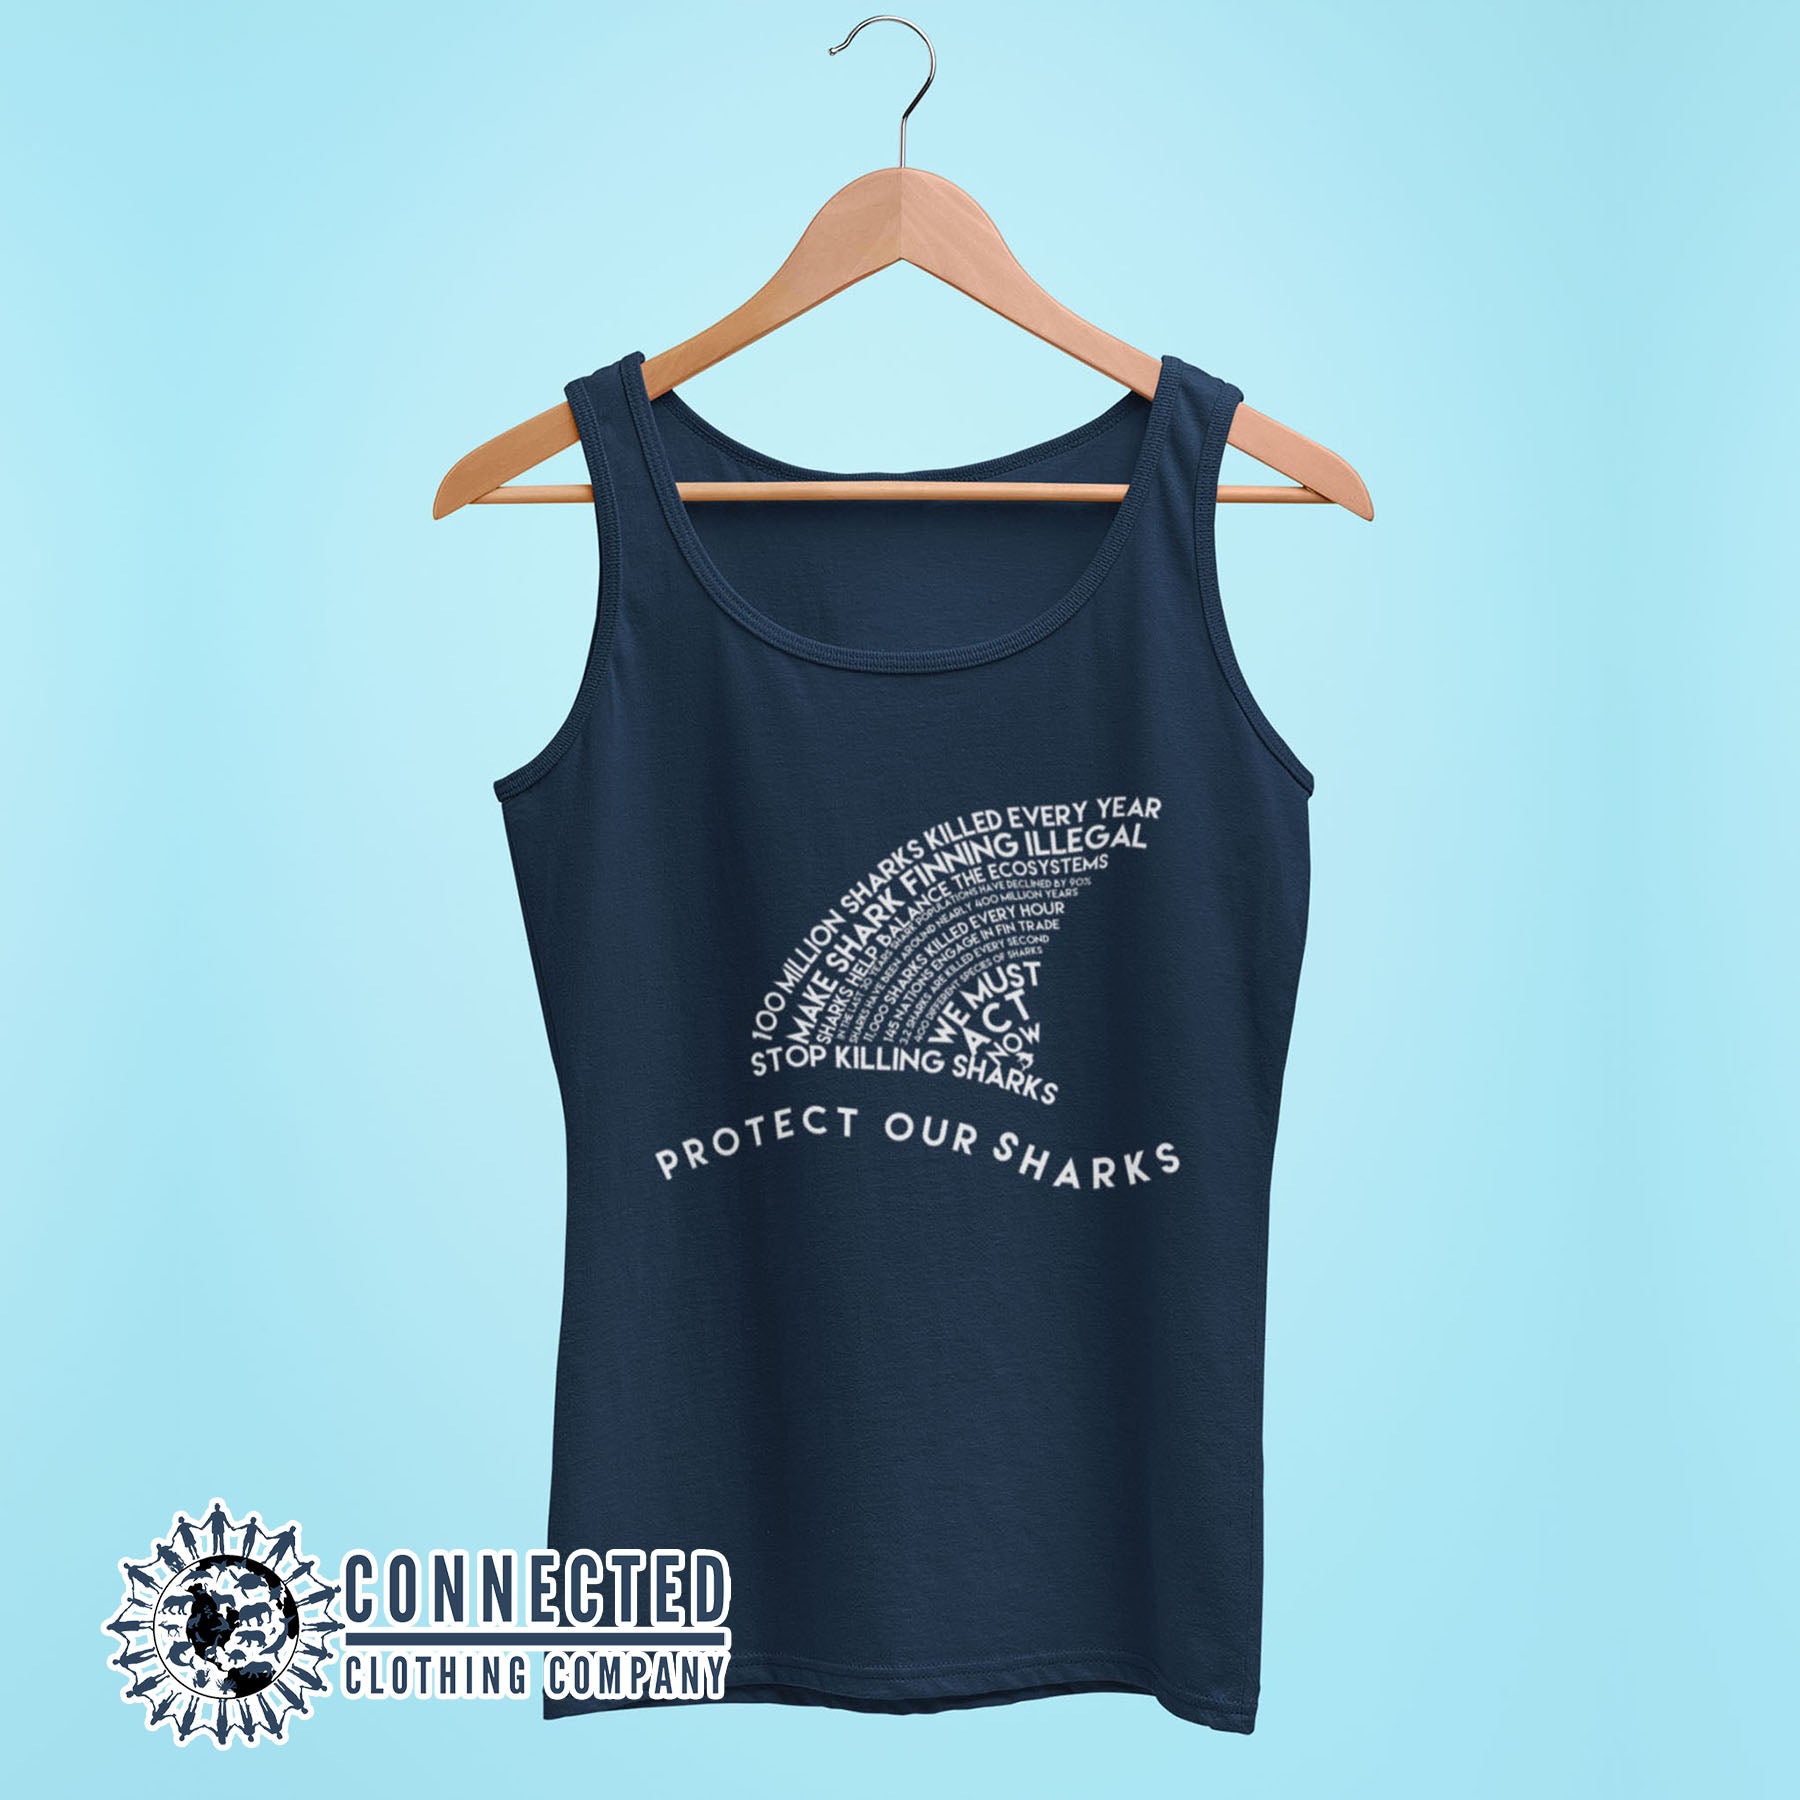 Navy Protect Our Sharks Women's Relaxed Tank Top - sharonkornman - Ethically and Sustainably Made - 10% of profits donated to Oceana shark conservation